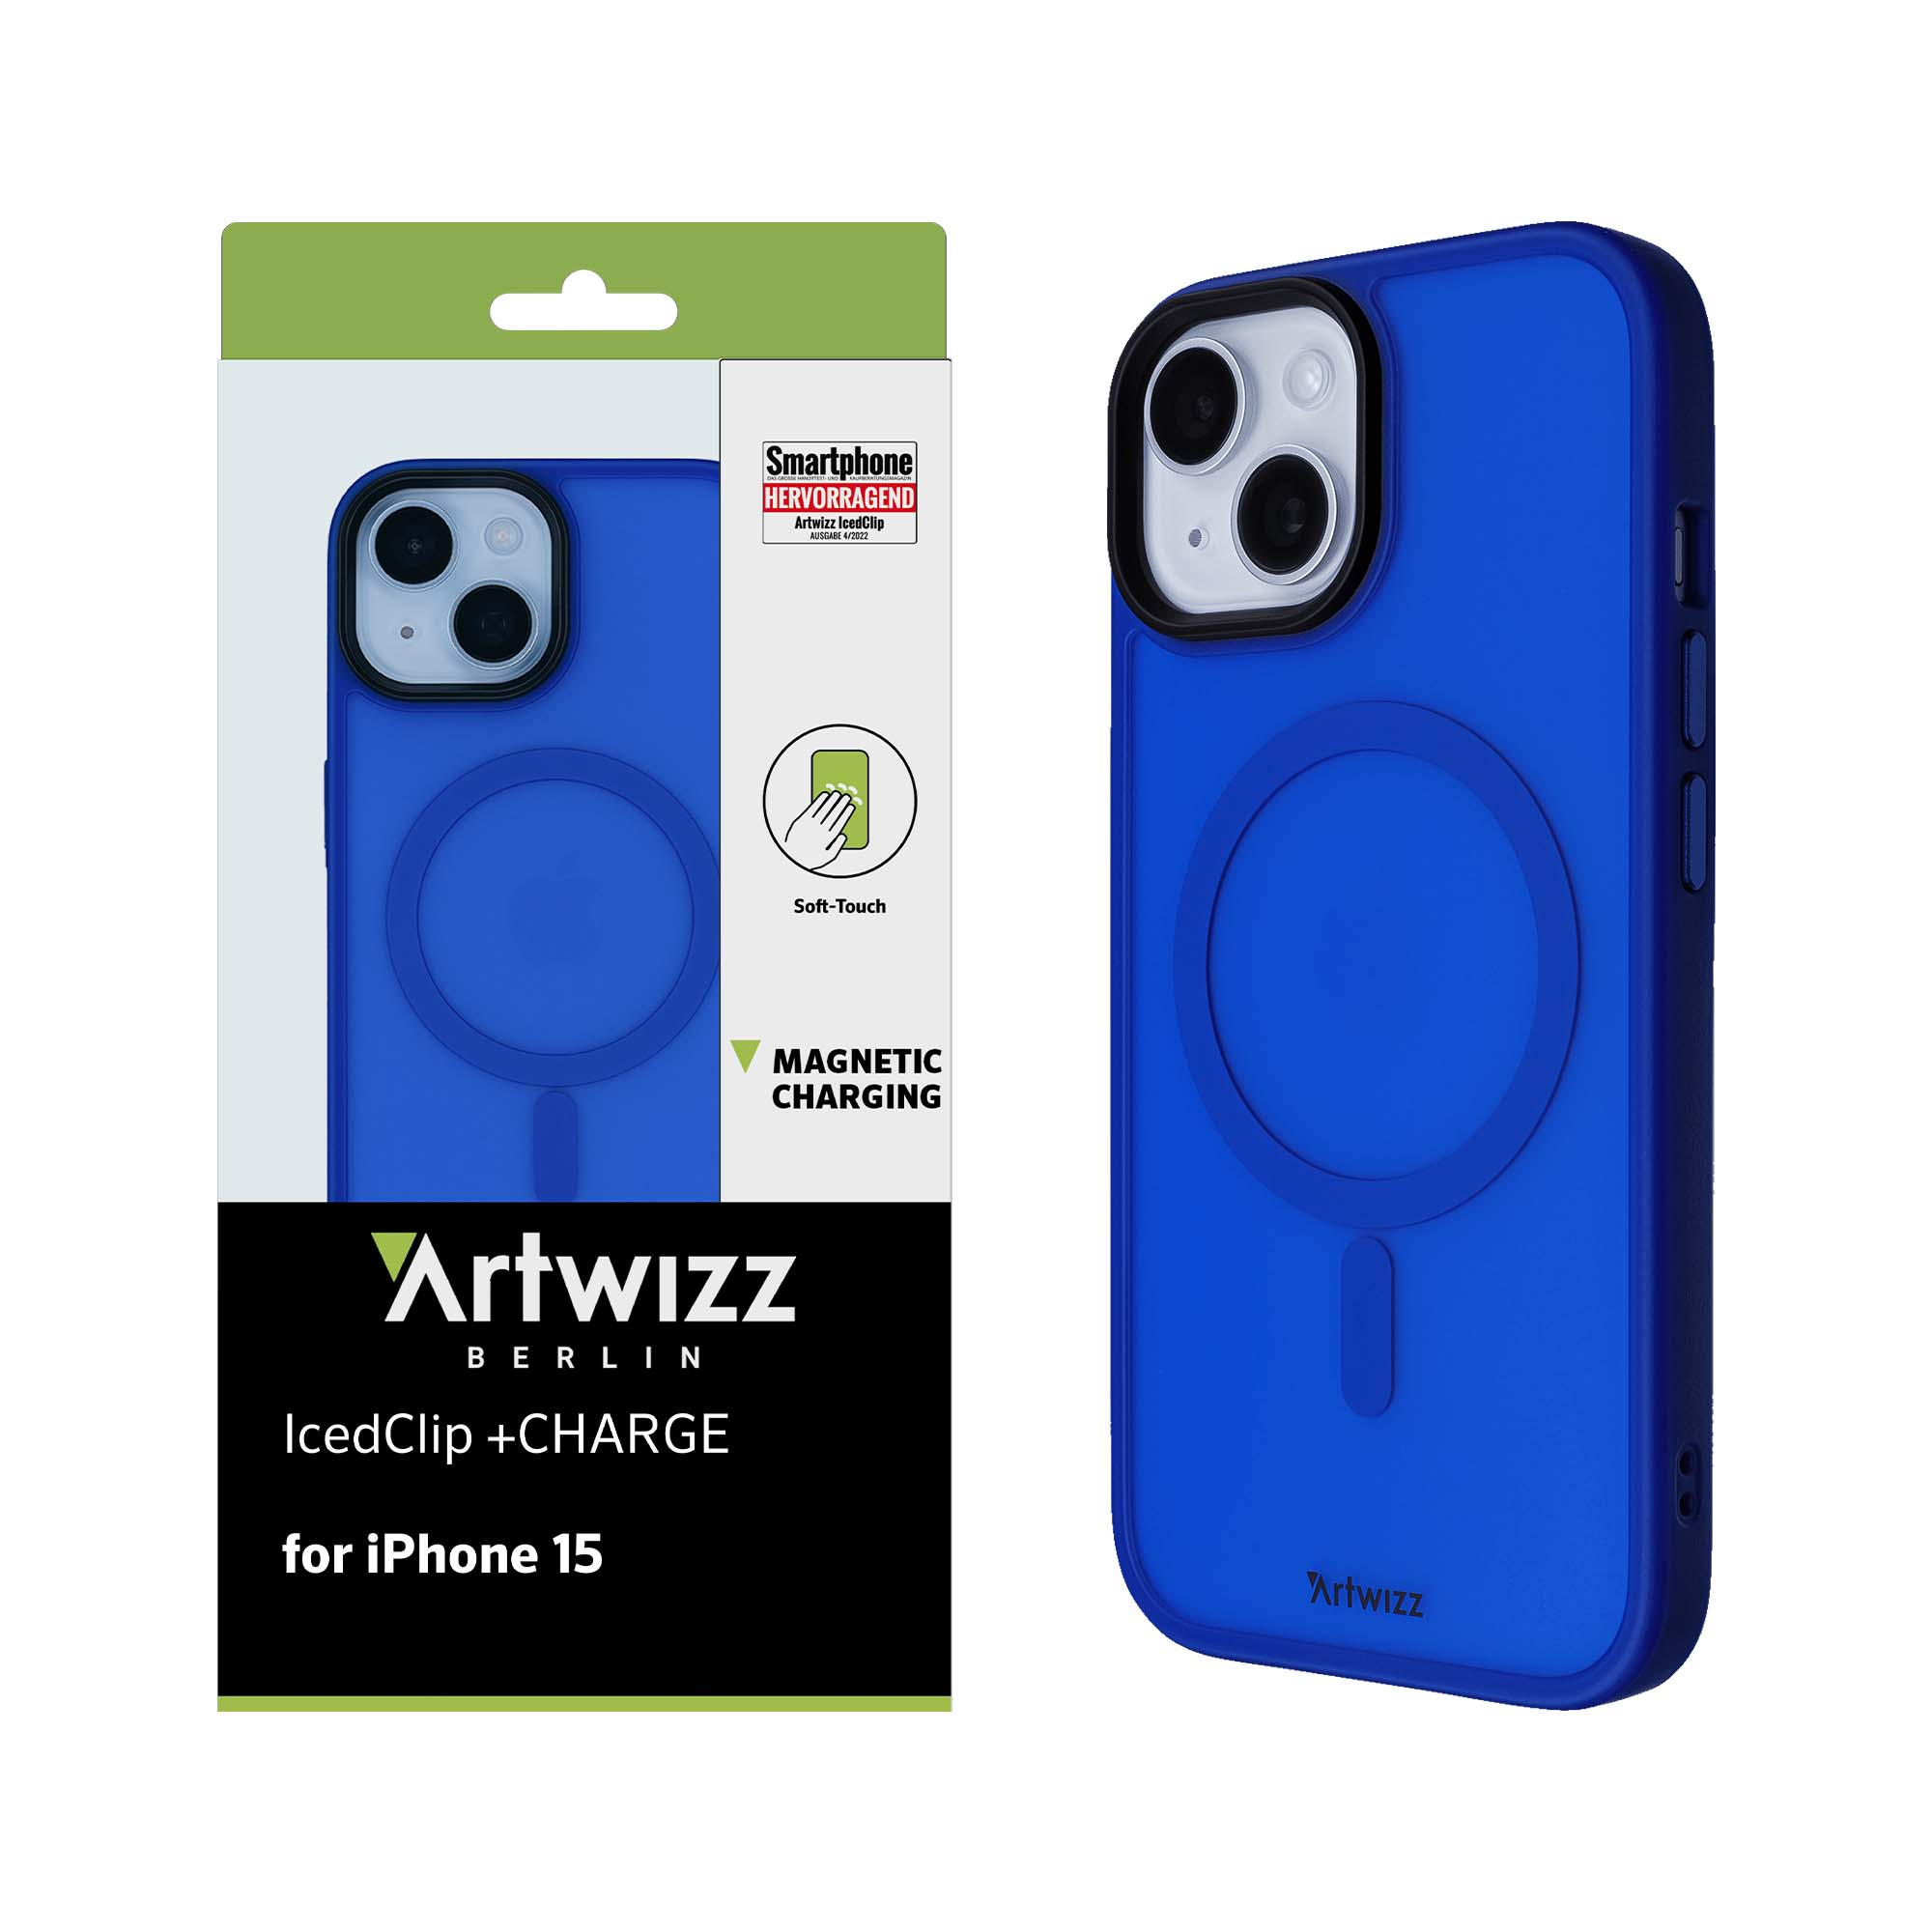 ARTWIZZ IcedClip +CHARGE, Backcover, Apple, iPhone 15, Blau